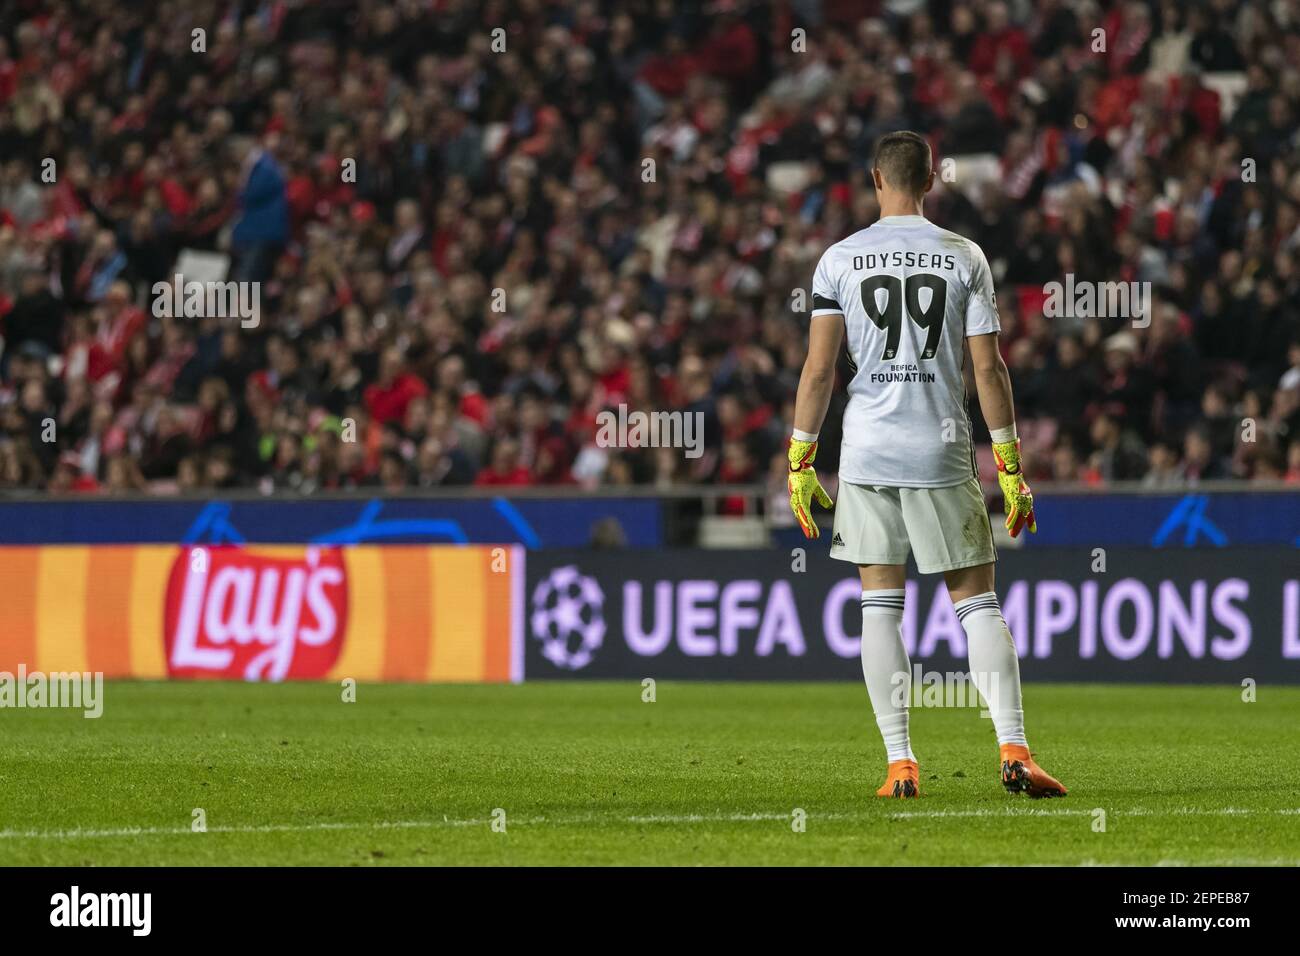 Odysseas Vlachodimos of SL Benfica seen in action during the UEFA Champions  League Match 2019/20 between SL Benfica and FC Zenit at Estádio da Luz in  Lisbon. (Final score; SL Benfica Lisbon